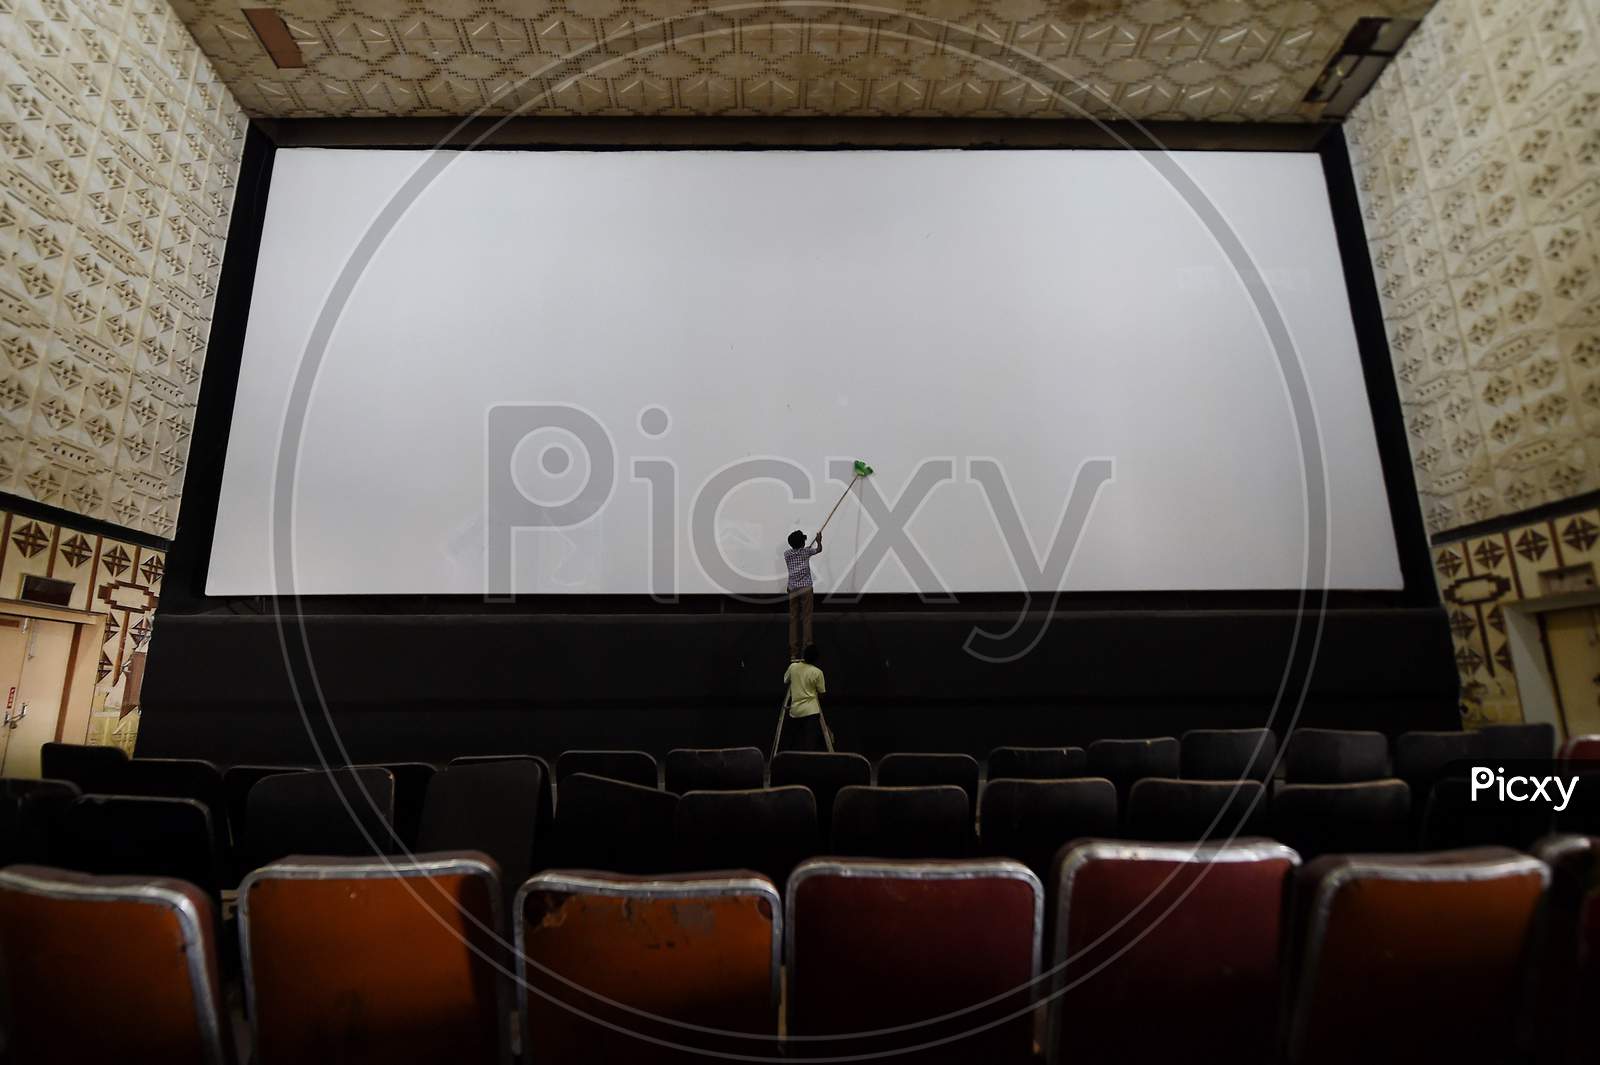 A Worker Cleans A Cinema Hall Ahead Of Its Reopening, During Unlock 5, Amid The Coronavirus Pandemic, In Chennai, Fridayday, Oct.9, 2020